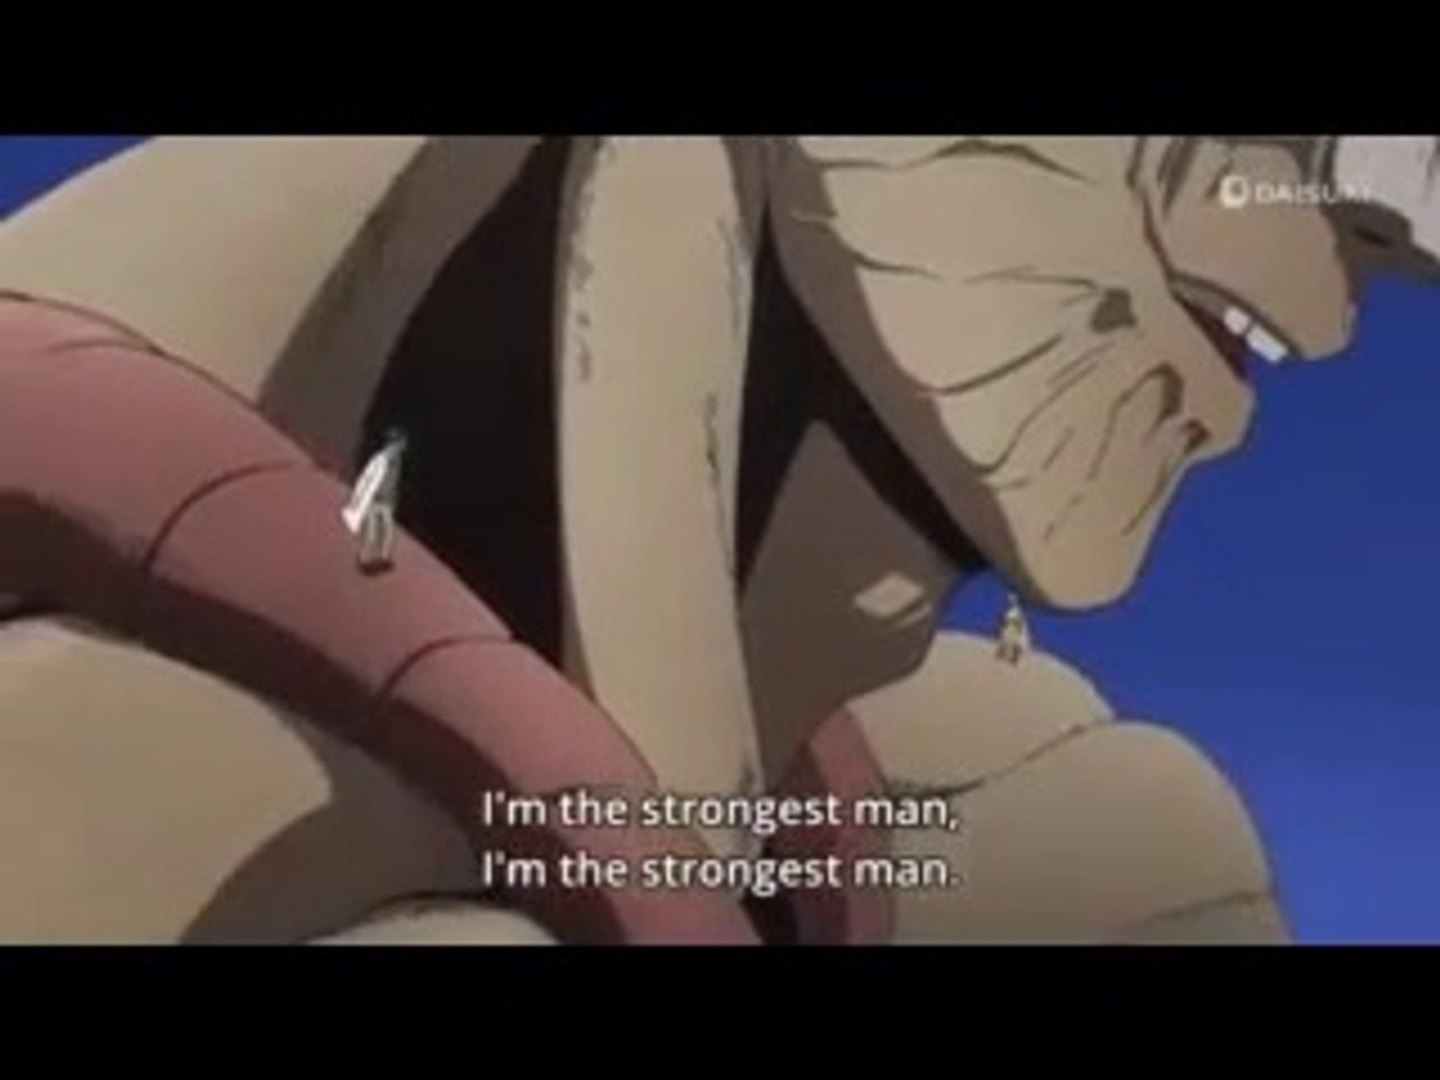 One Punch Man Season 3 Episode 2 S3e2 Full Episodes Video Dailymotion